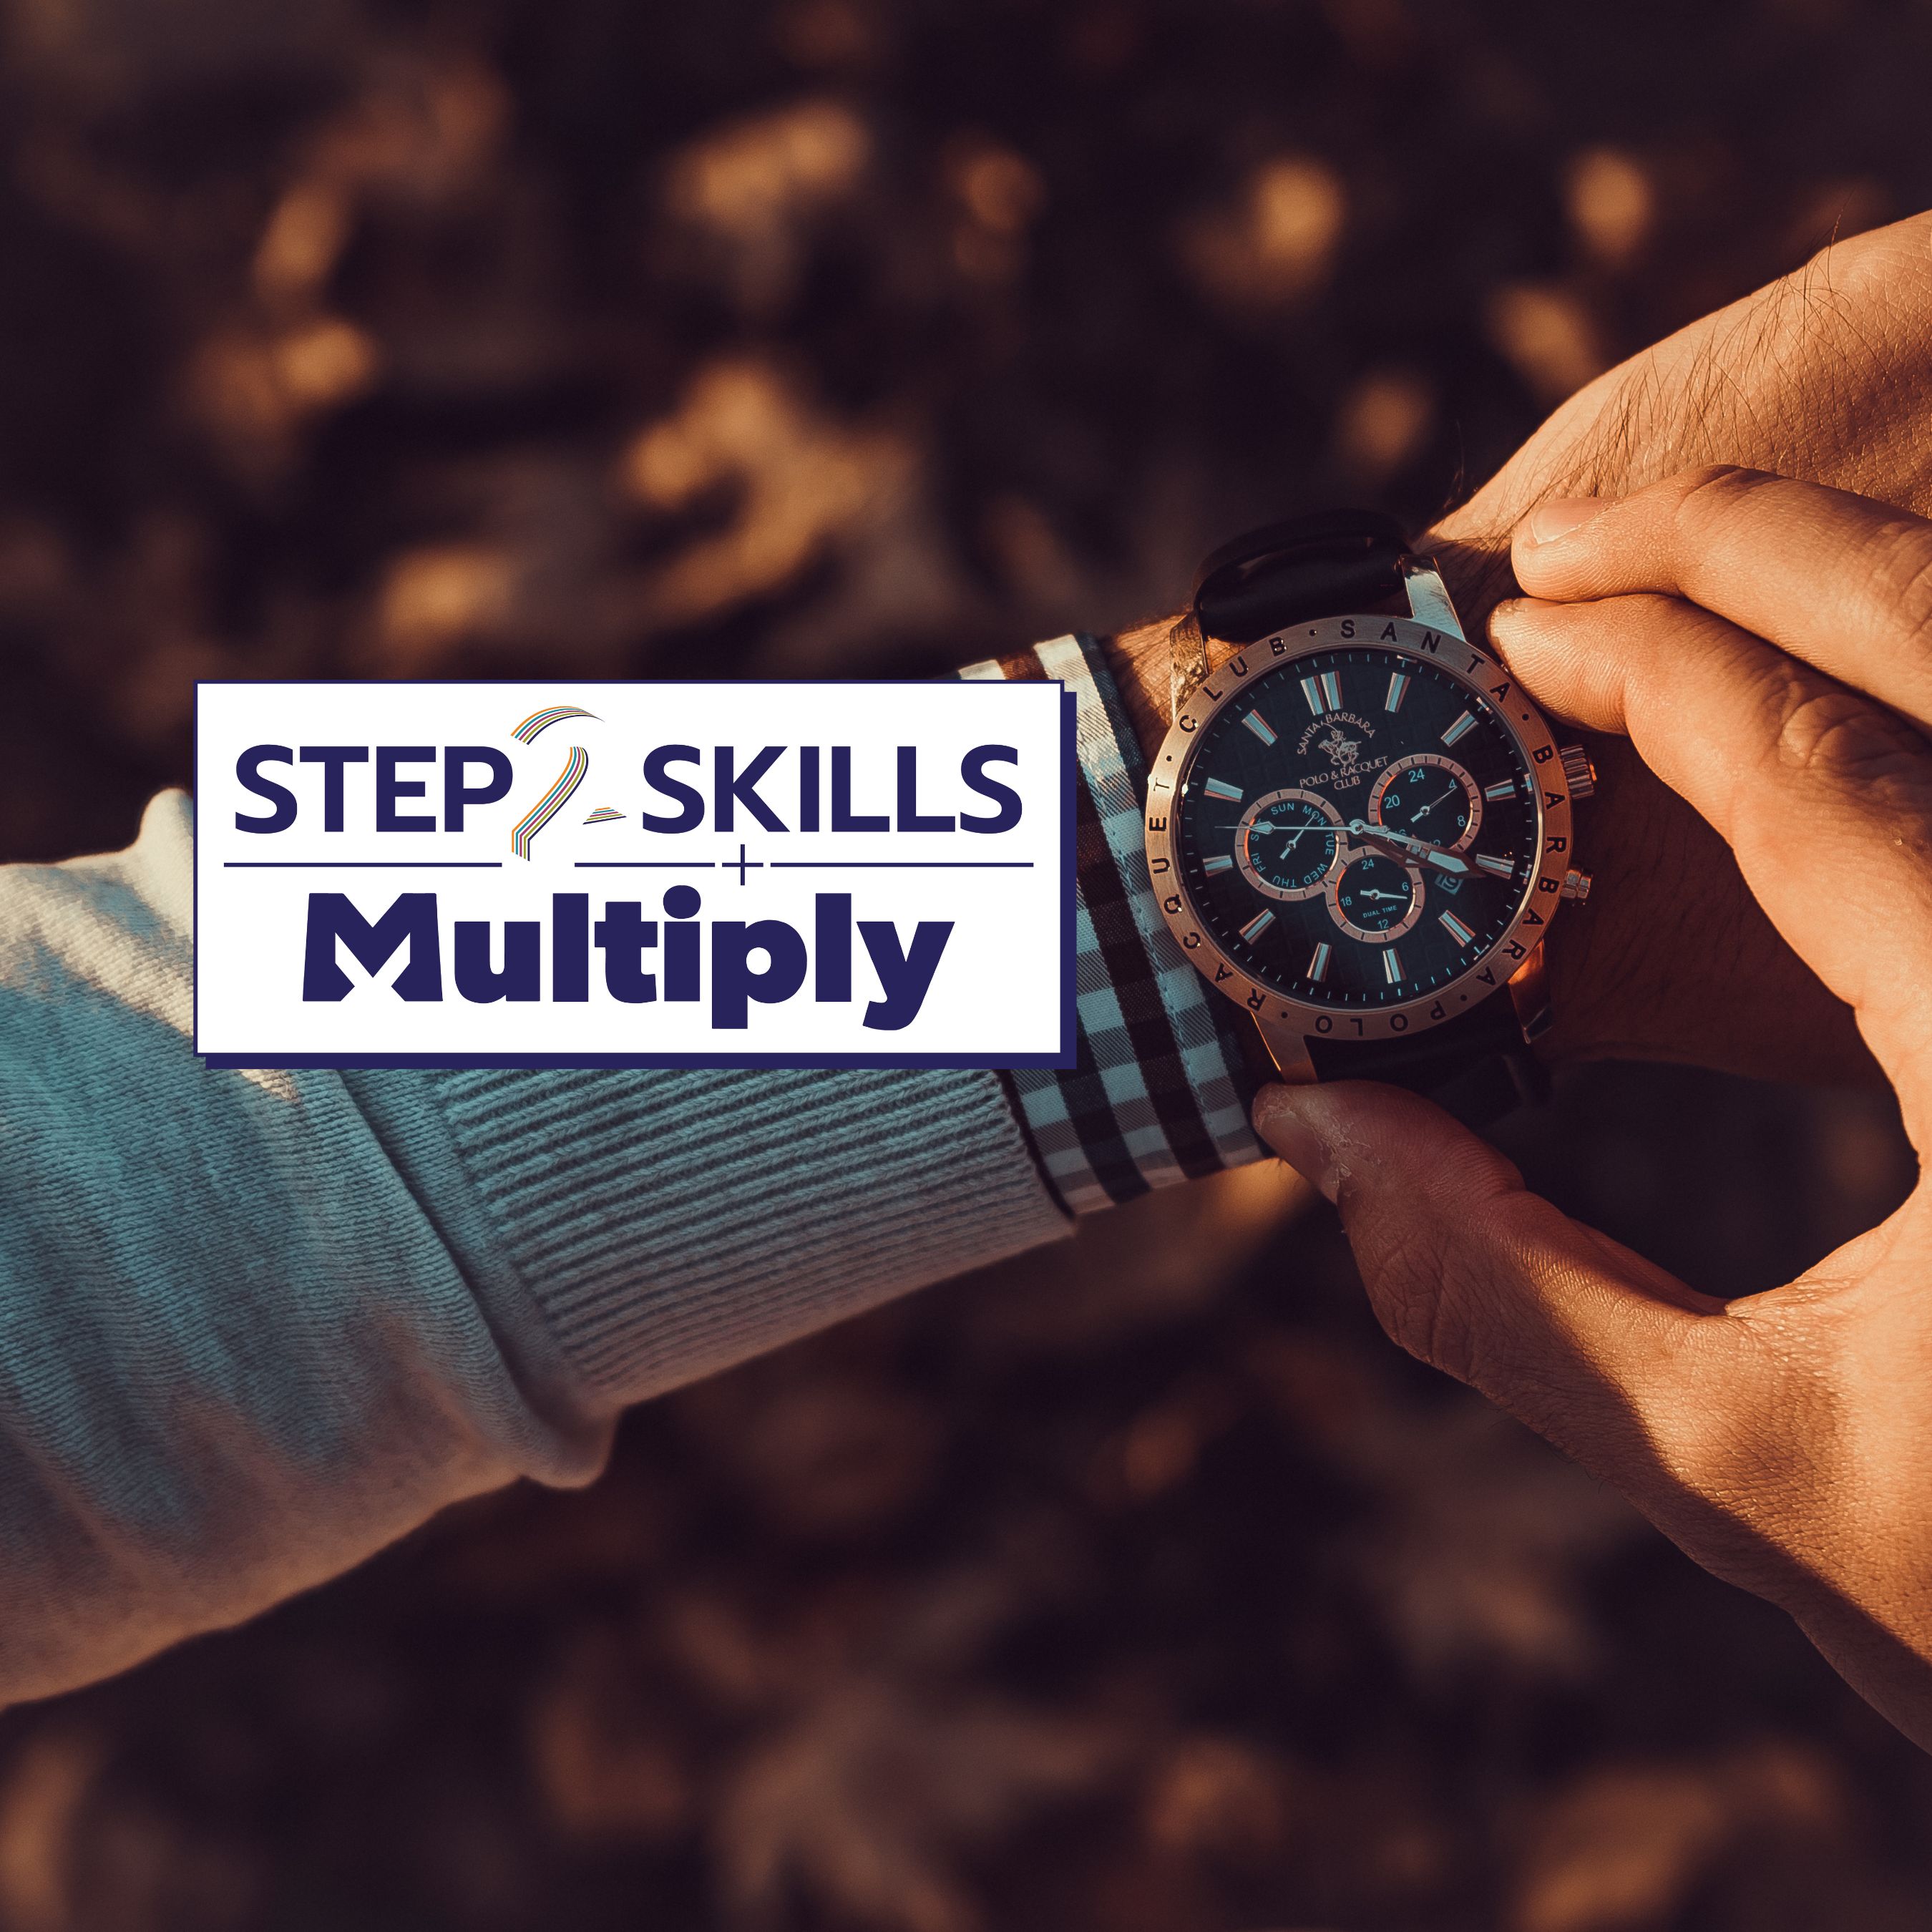 Multiply - Time Management